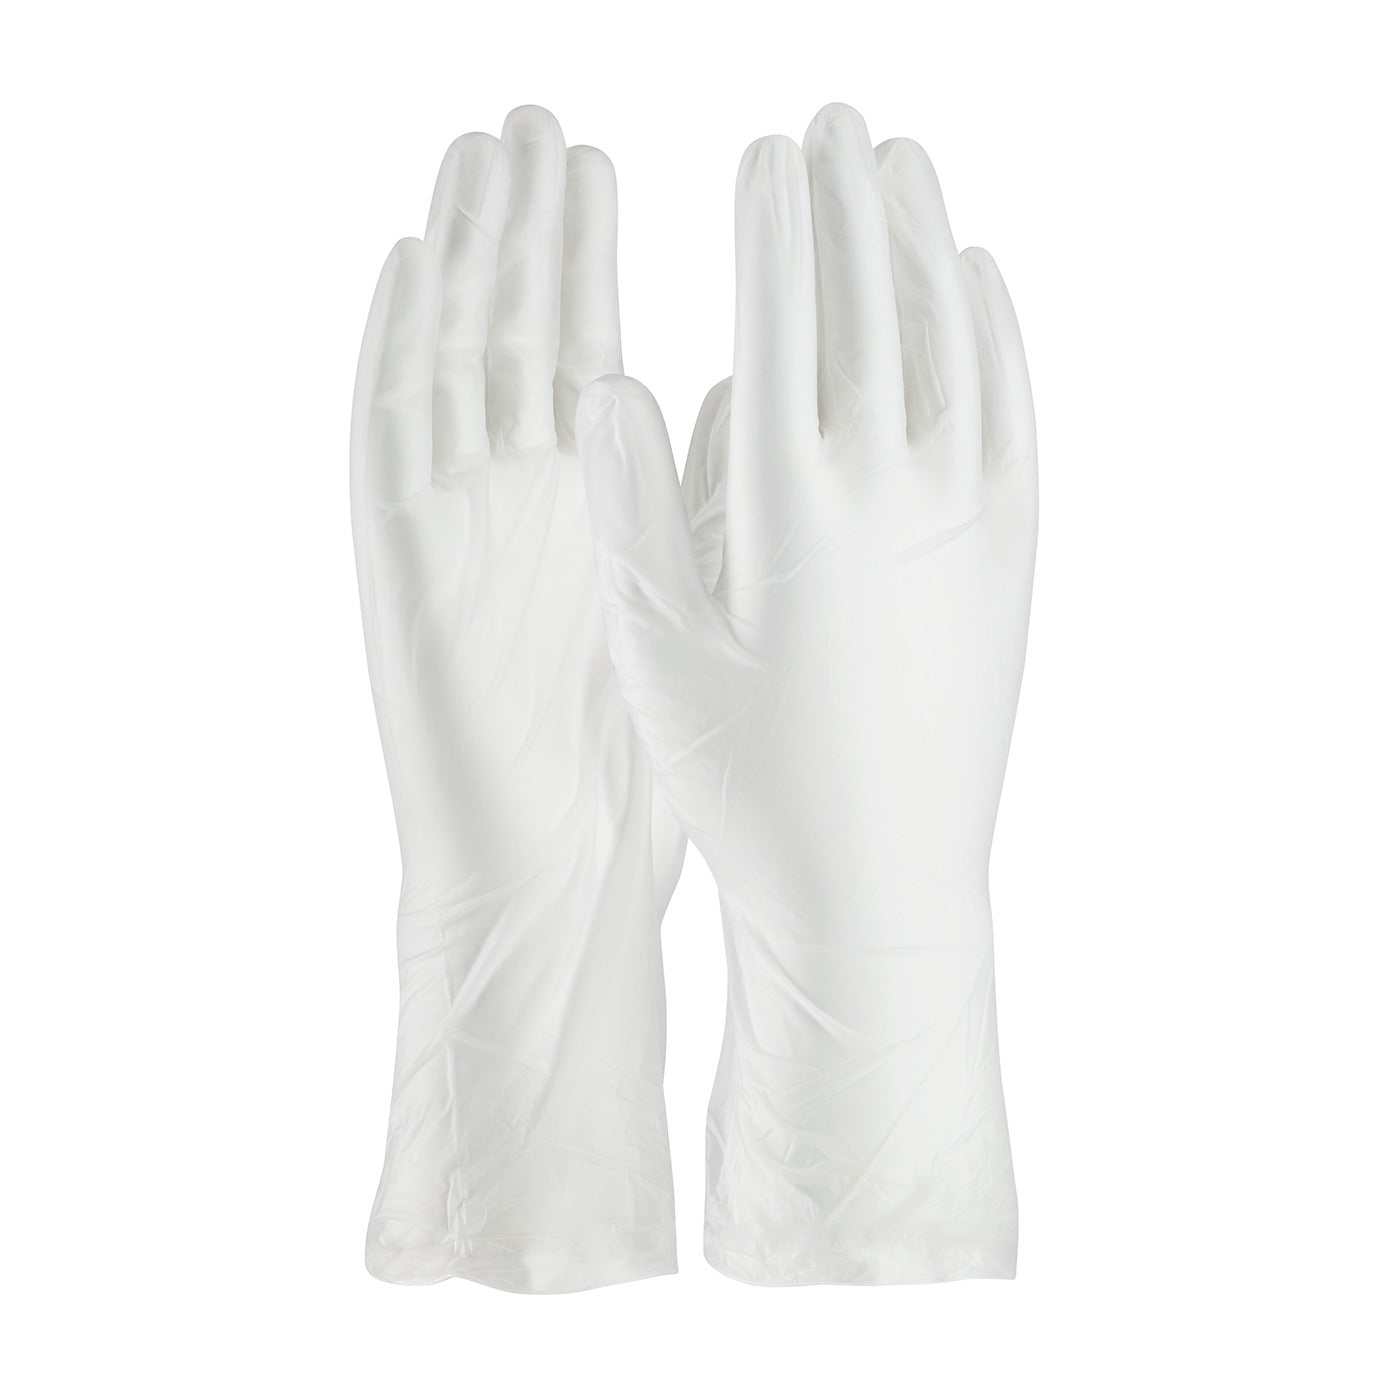 CleanTeam 100-2830/L Single Use Class 100 Cleanroom Vinyl Glove with Finger Textured Grip - 12"